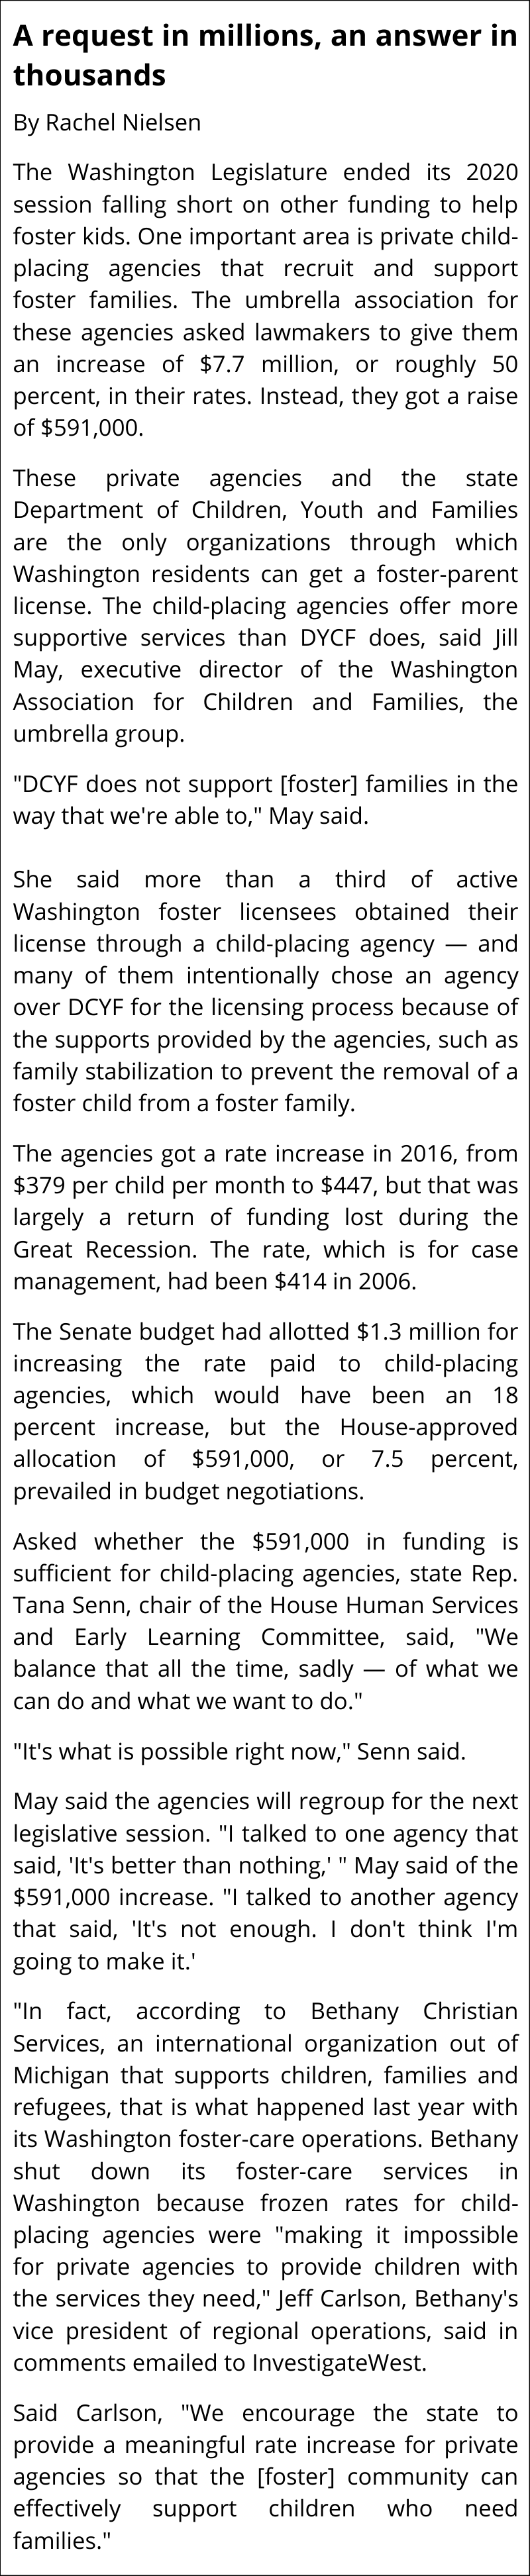 Foster-care funding falls short of ending hotel-stay crisis -  InvestigateWest